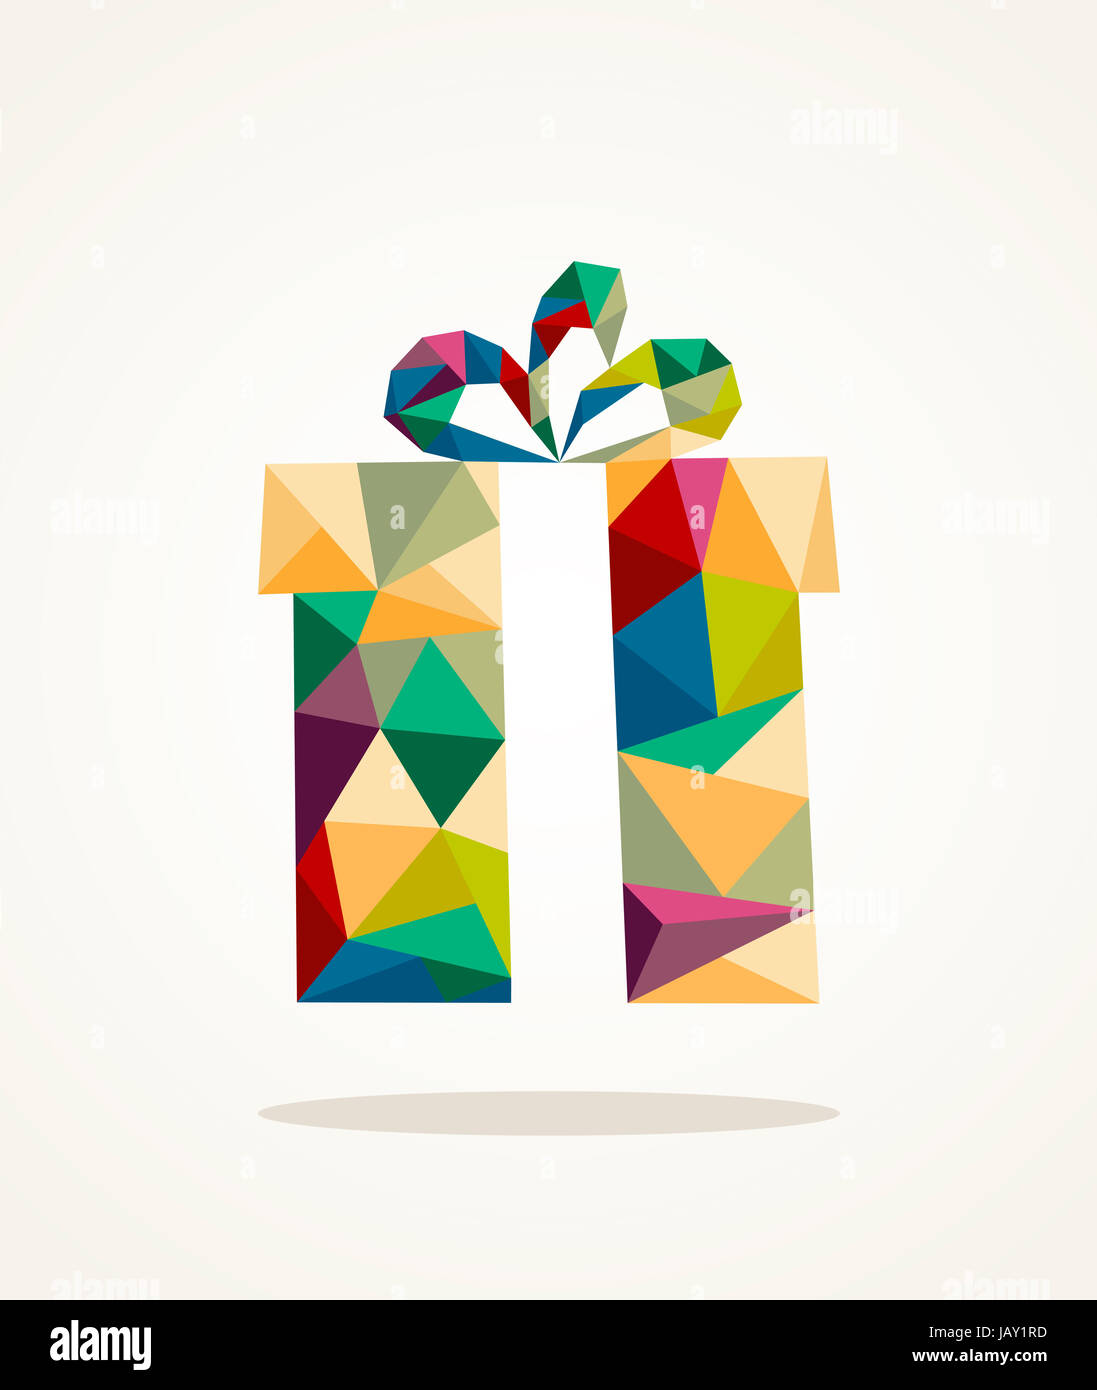 Isolated colorful abstract Christmas gift box triangle composition. EPS10 vector file organized in layers for easy editing. Stock Photo